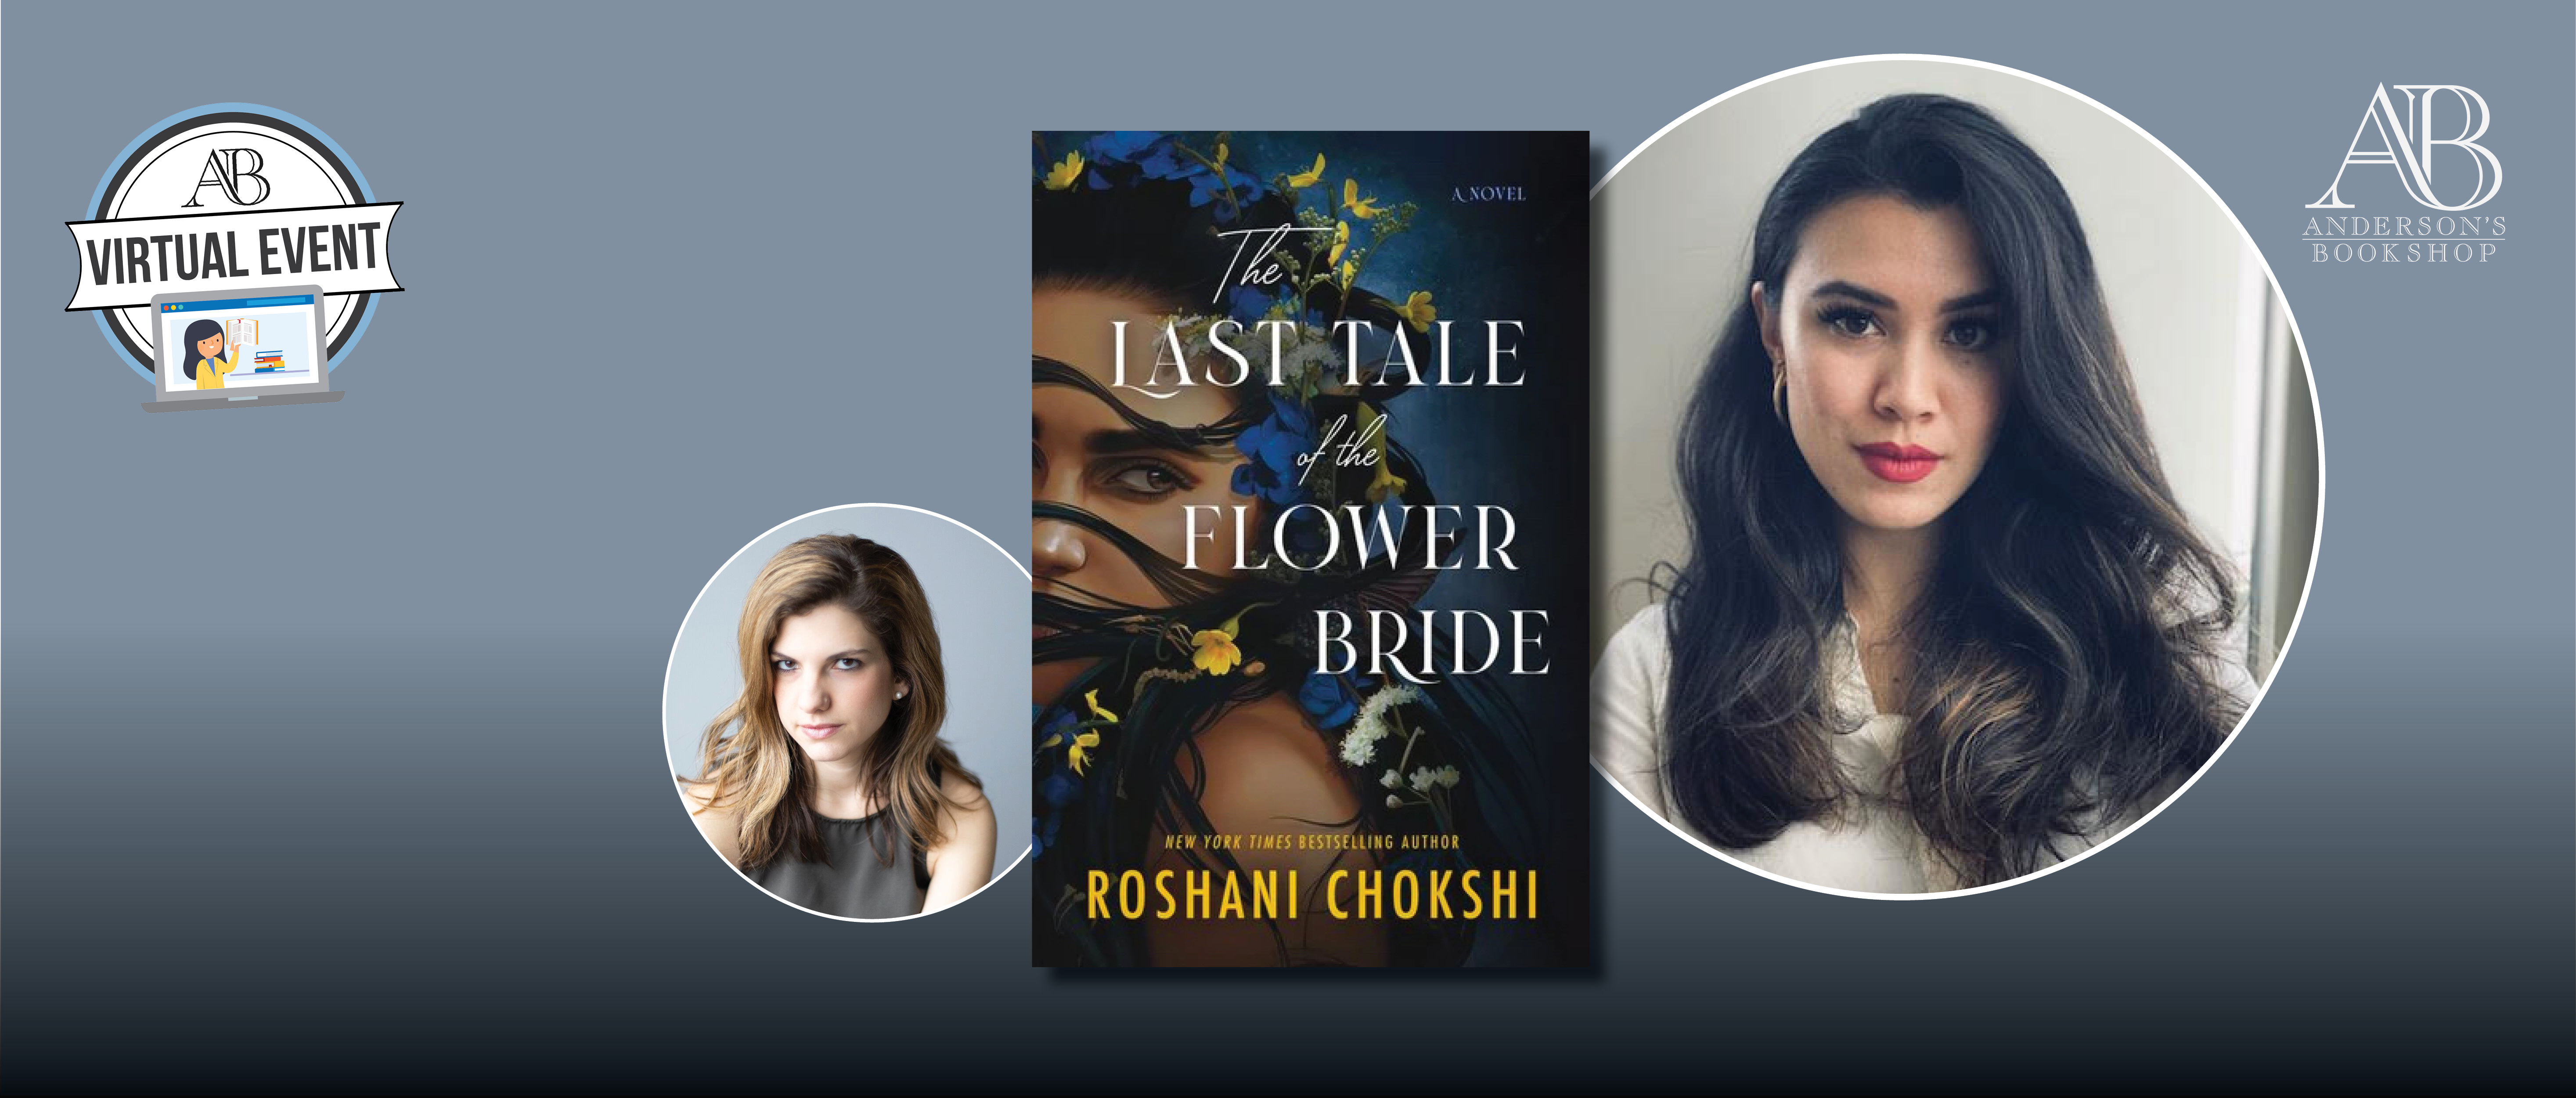 Virtual Author Event with Roshani Chokshi/The Last Tale of the Flower Bride